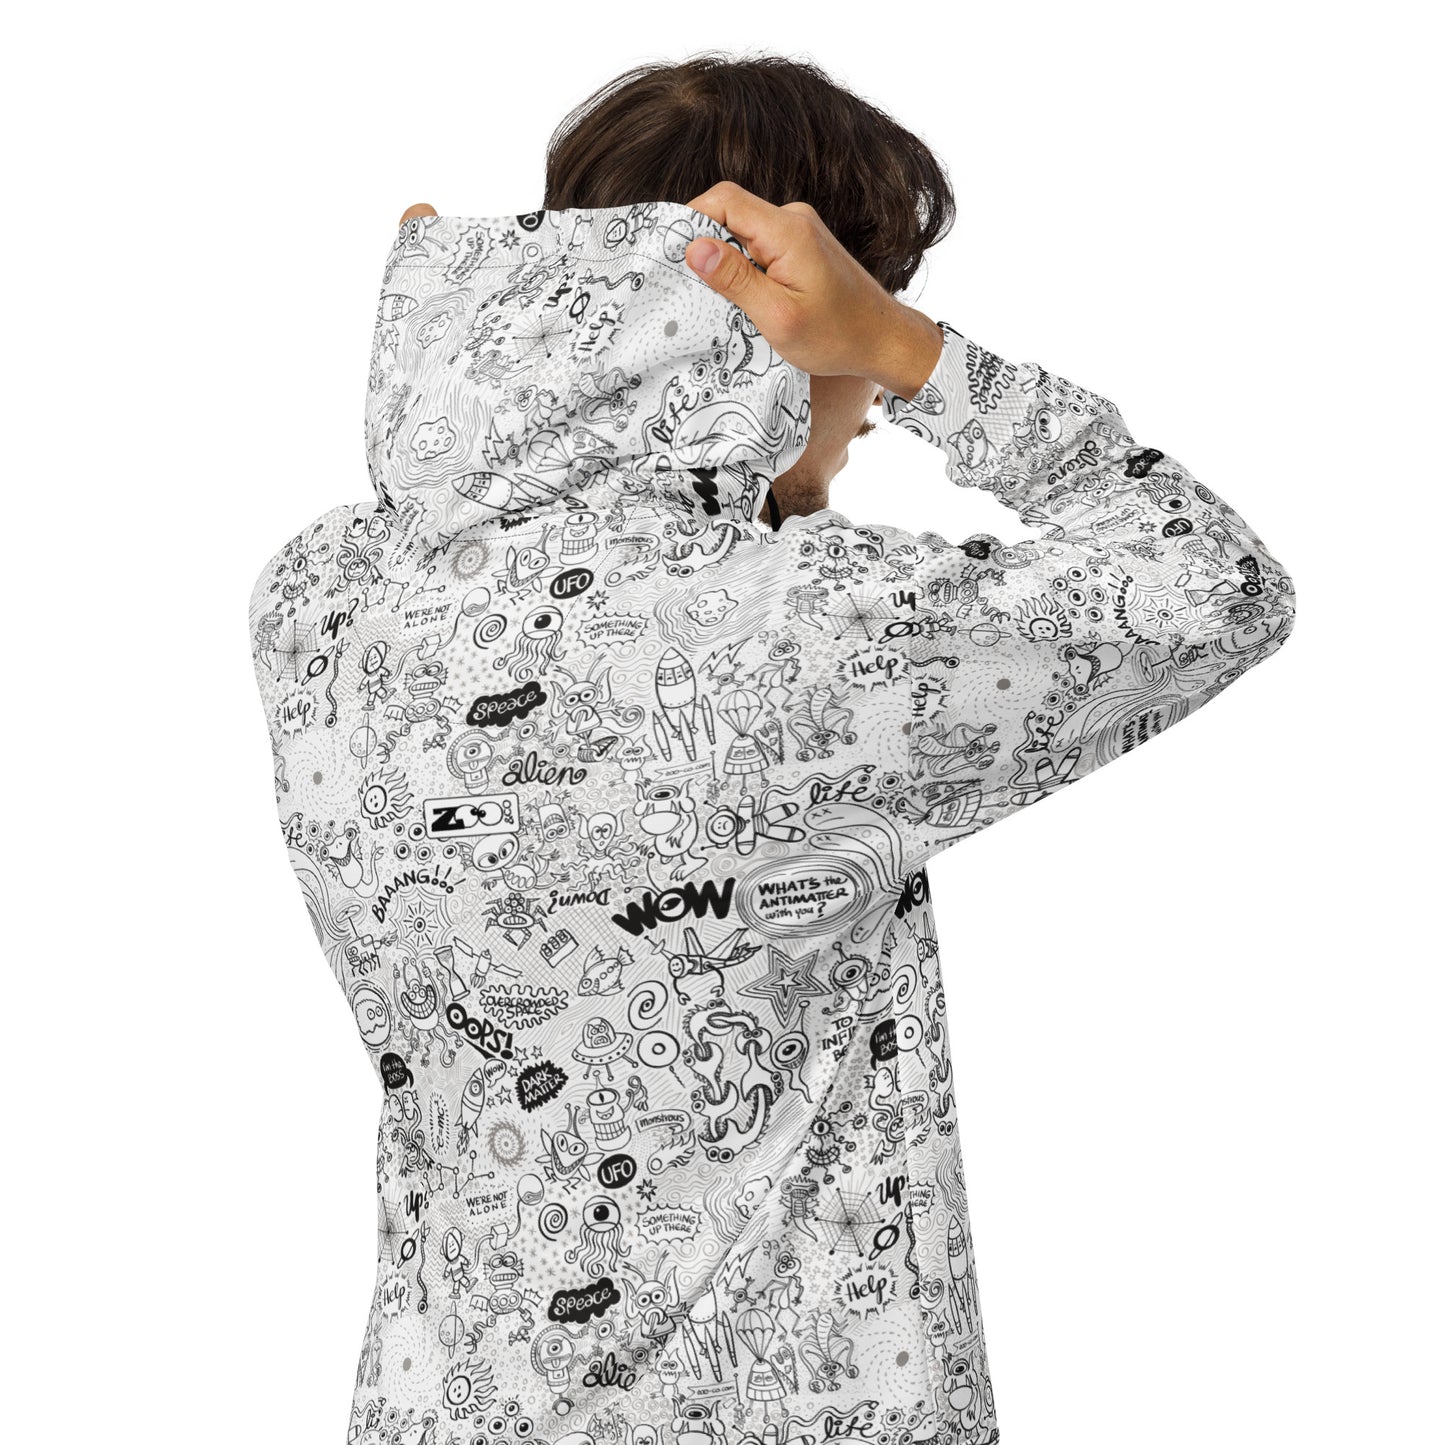 Celebrating the most Comprehensive Doodle Art of the Universe - Unisex zip hoodie. Back view